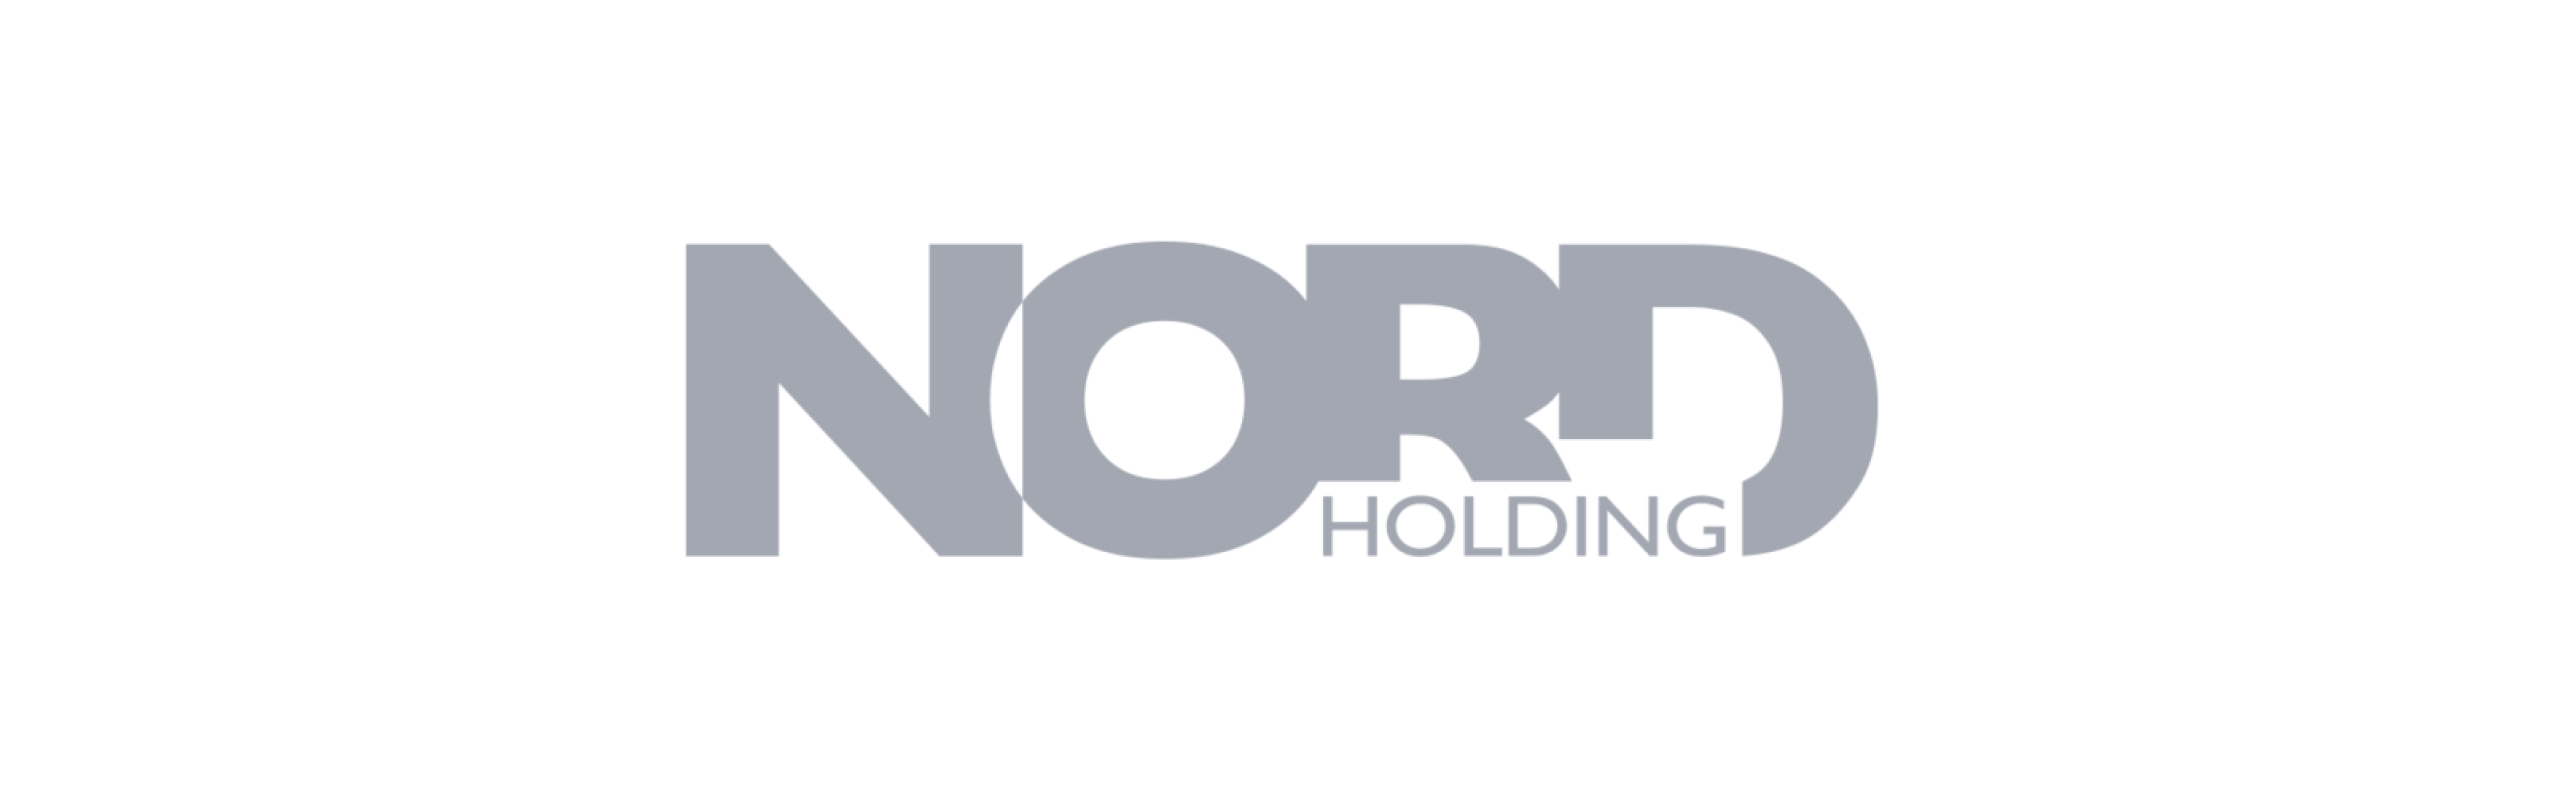 Technology & product due diligence | Code & Co. advises NORD HOLDING (logo shown)